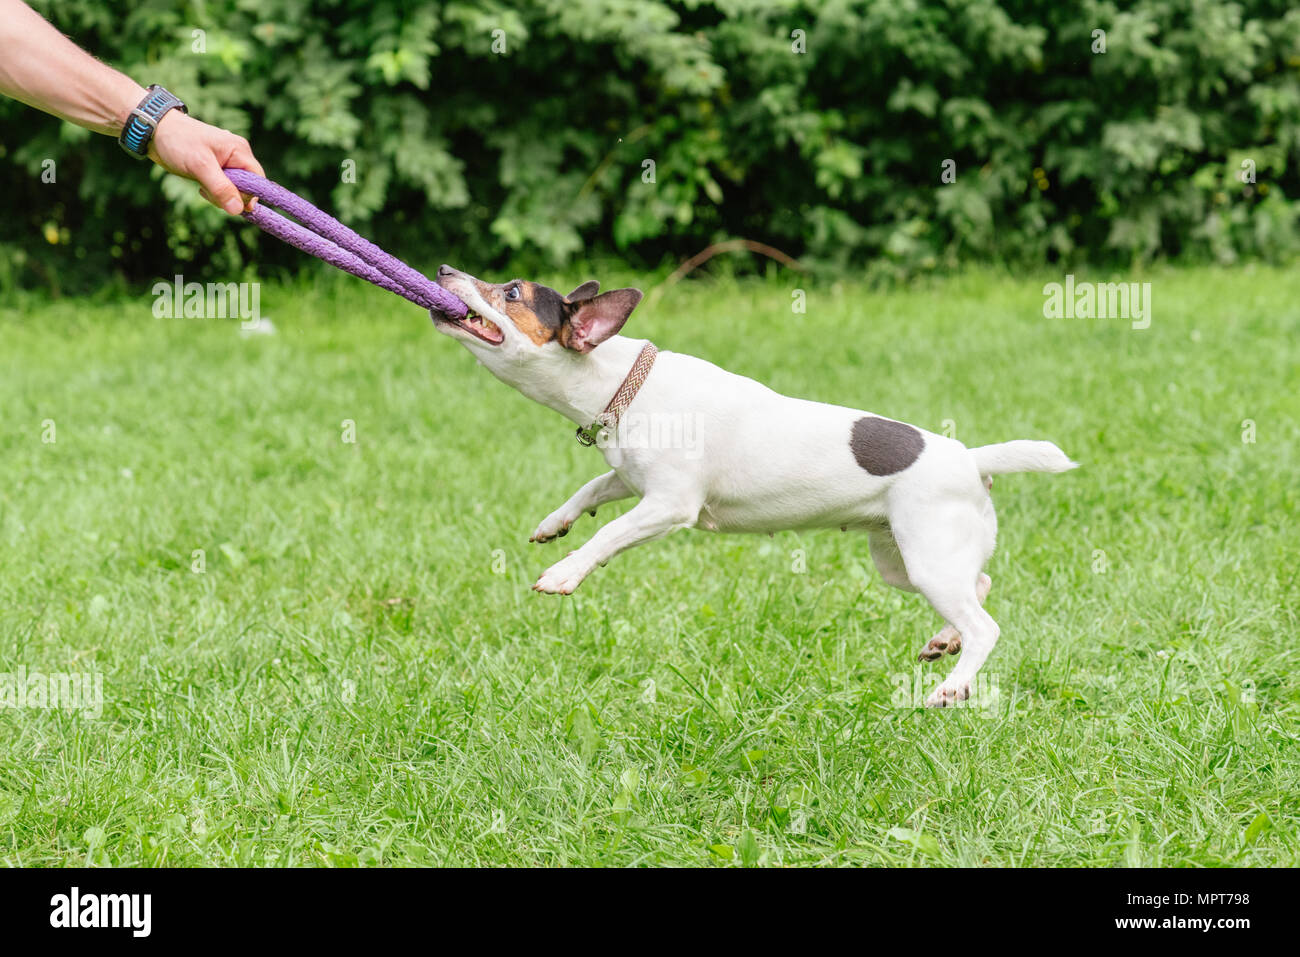 Man playing tug-of-war game with Jack Russell Terrier dog and puller toy Stock Photo